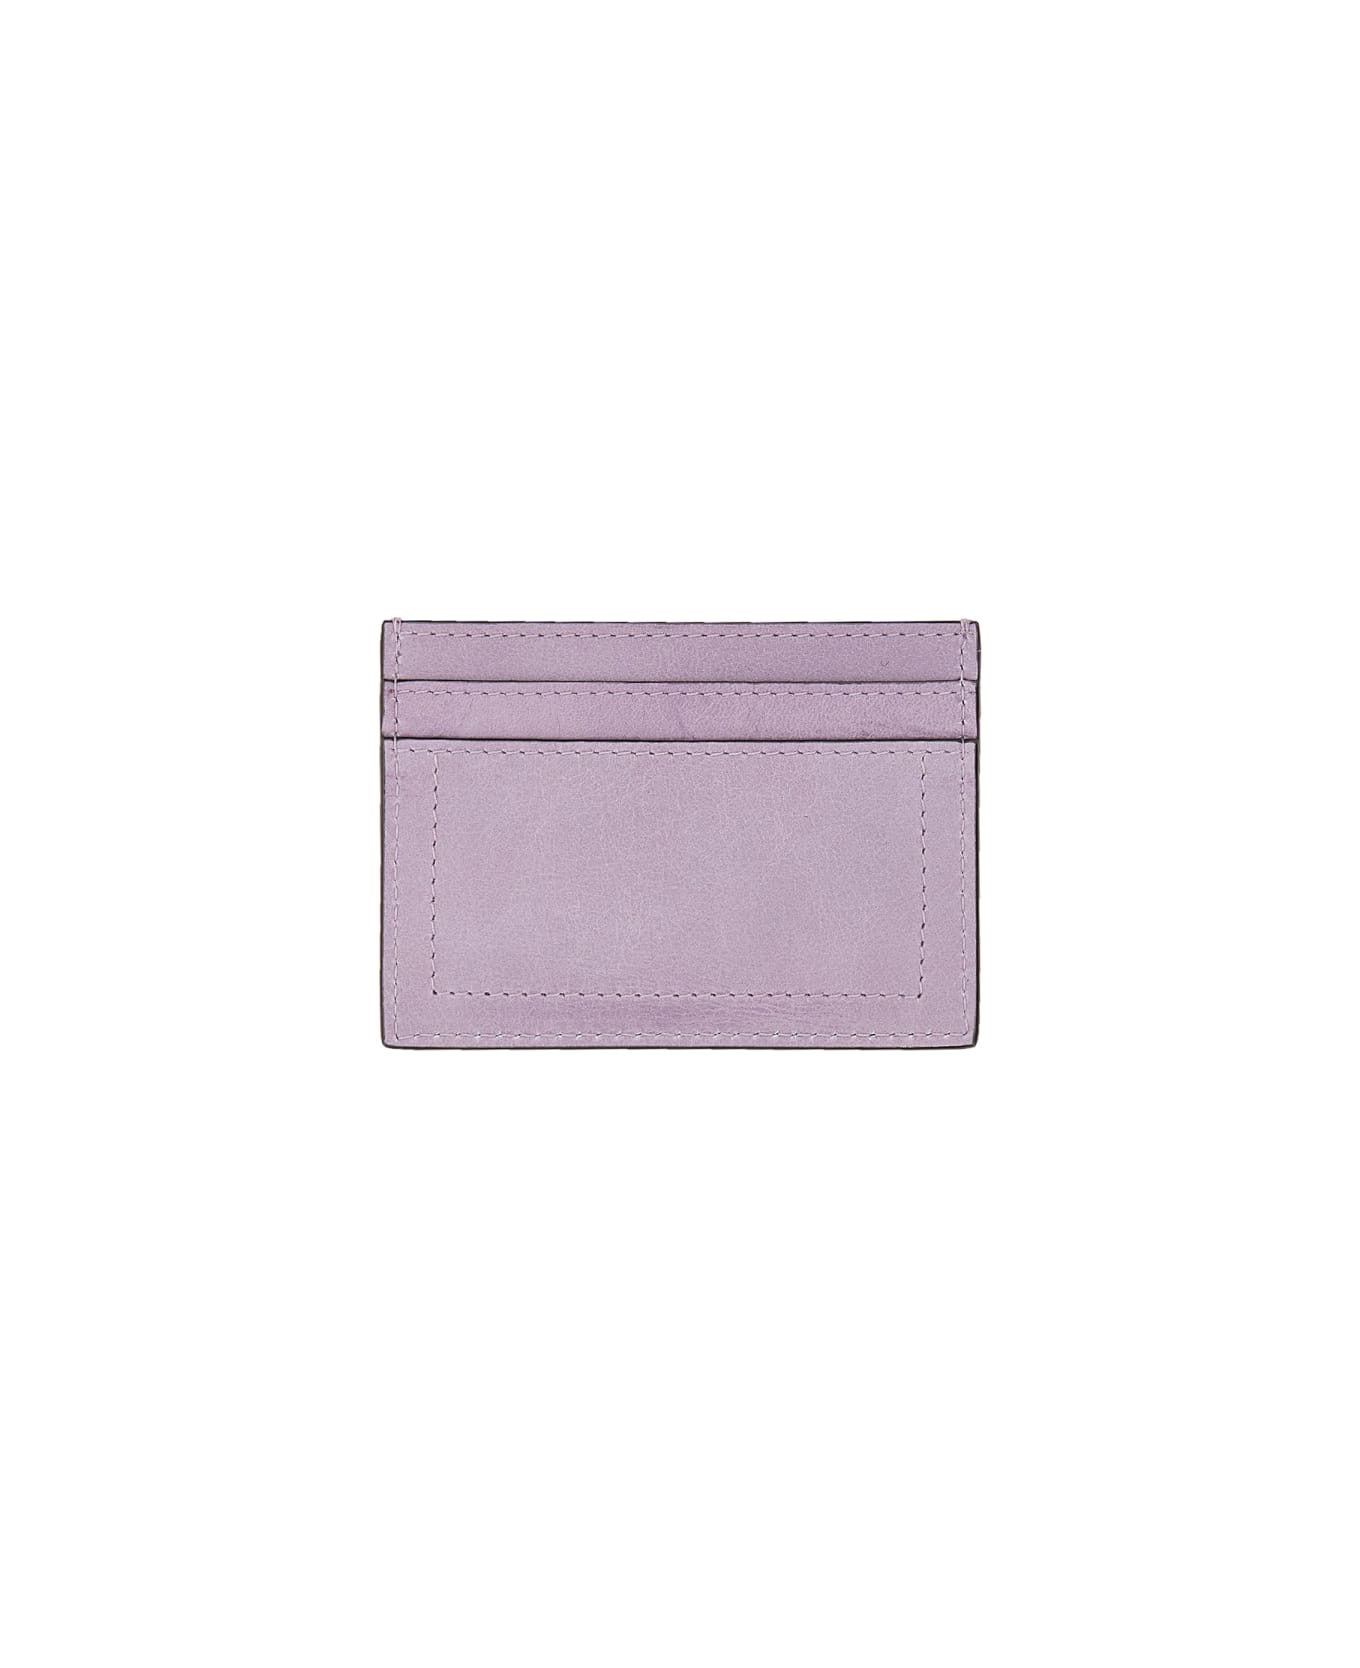 Moschino Card Holder With Gold Plaque - LILAC